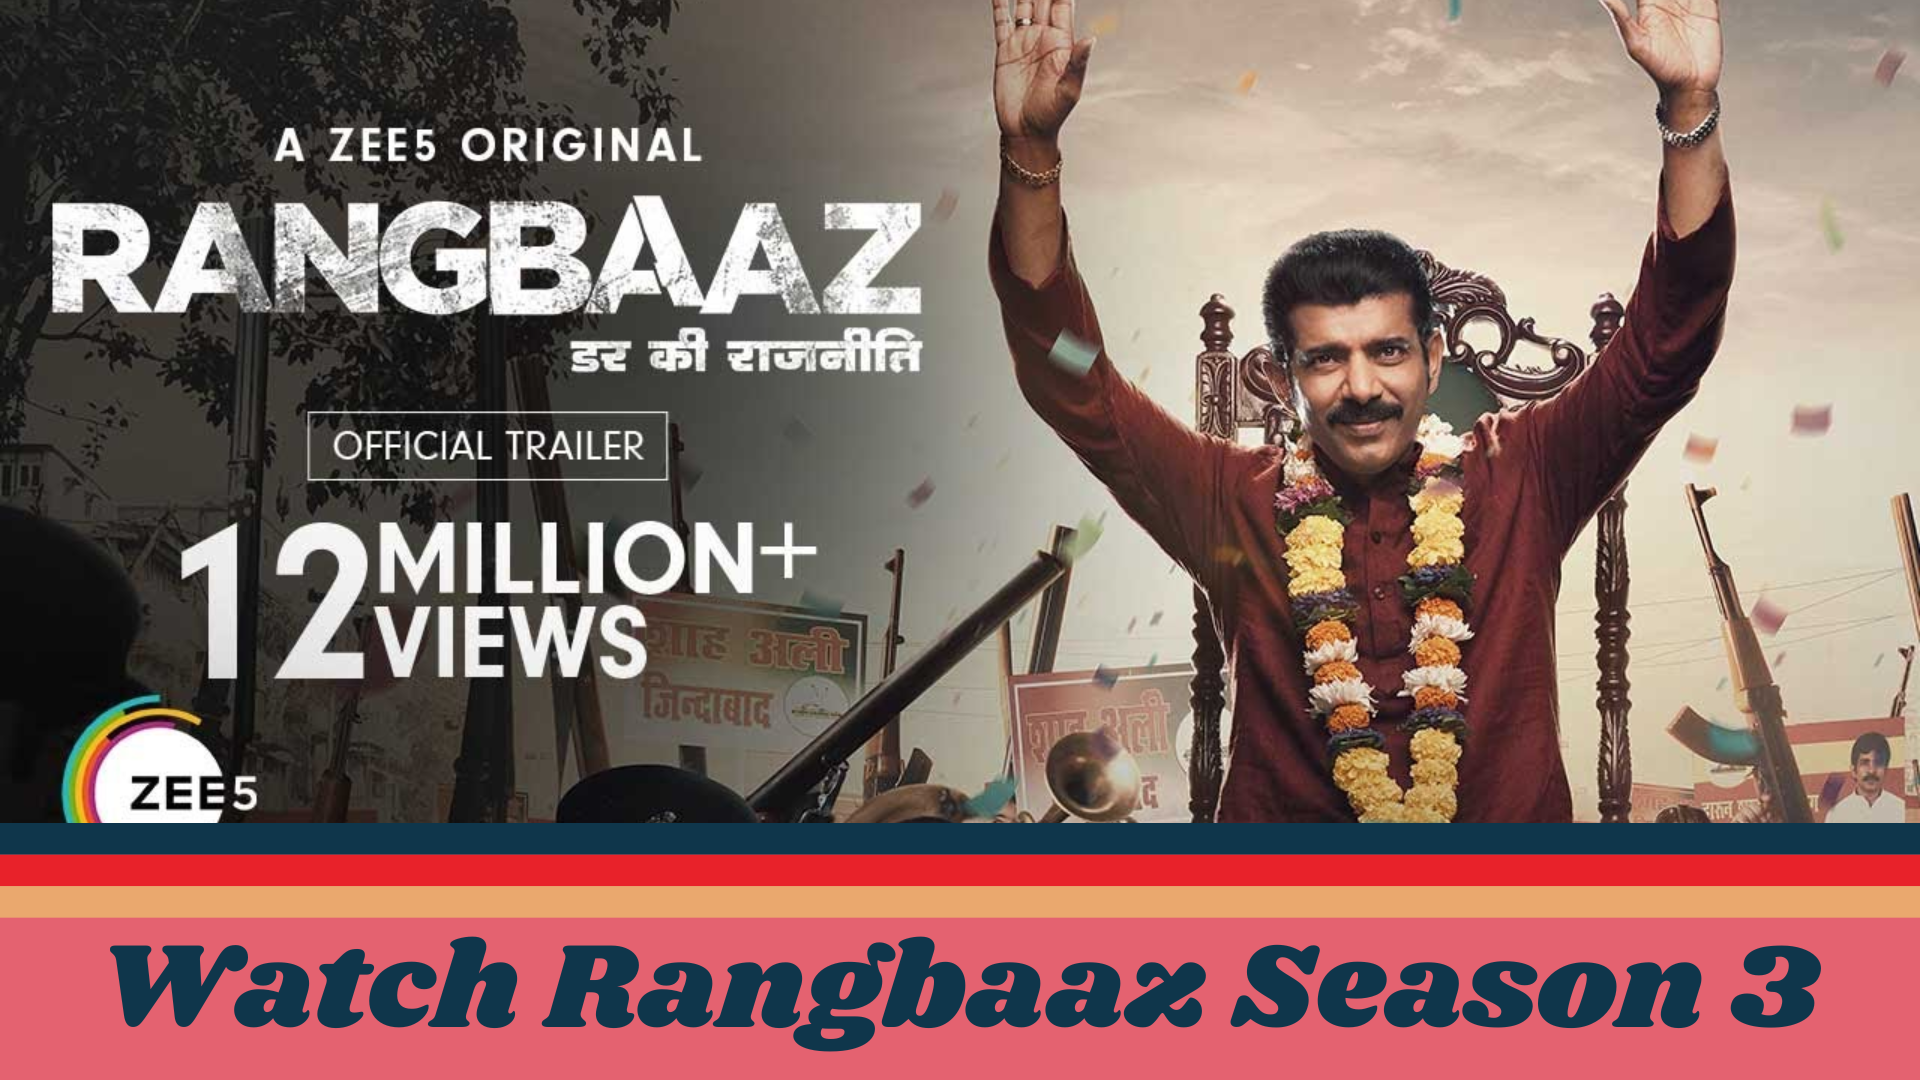 How to Download Rangbaaz Season 3 Online For Free?